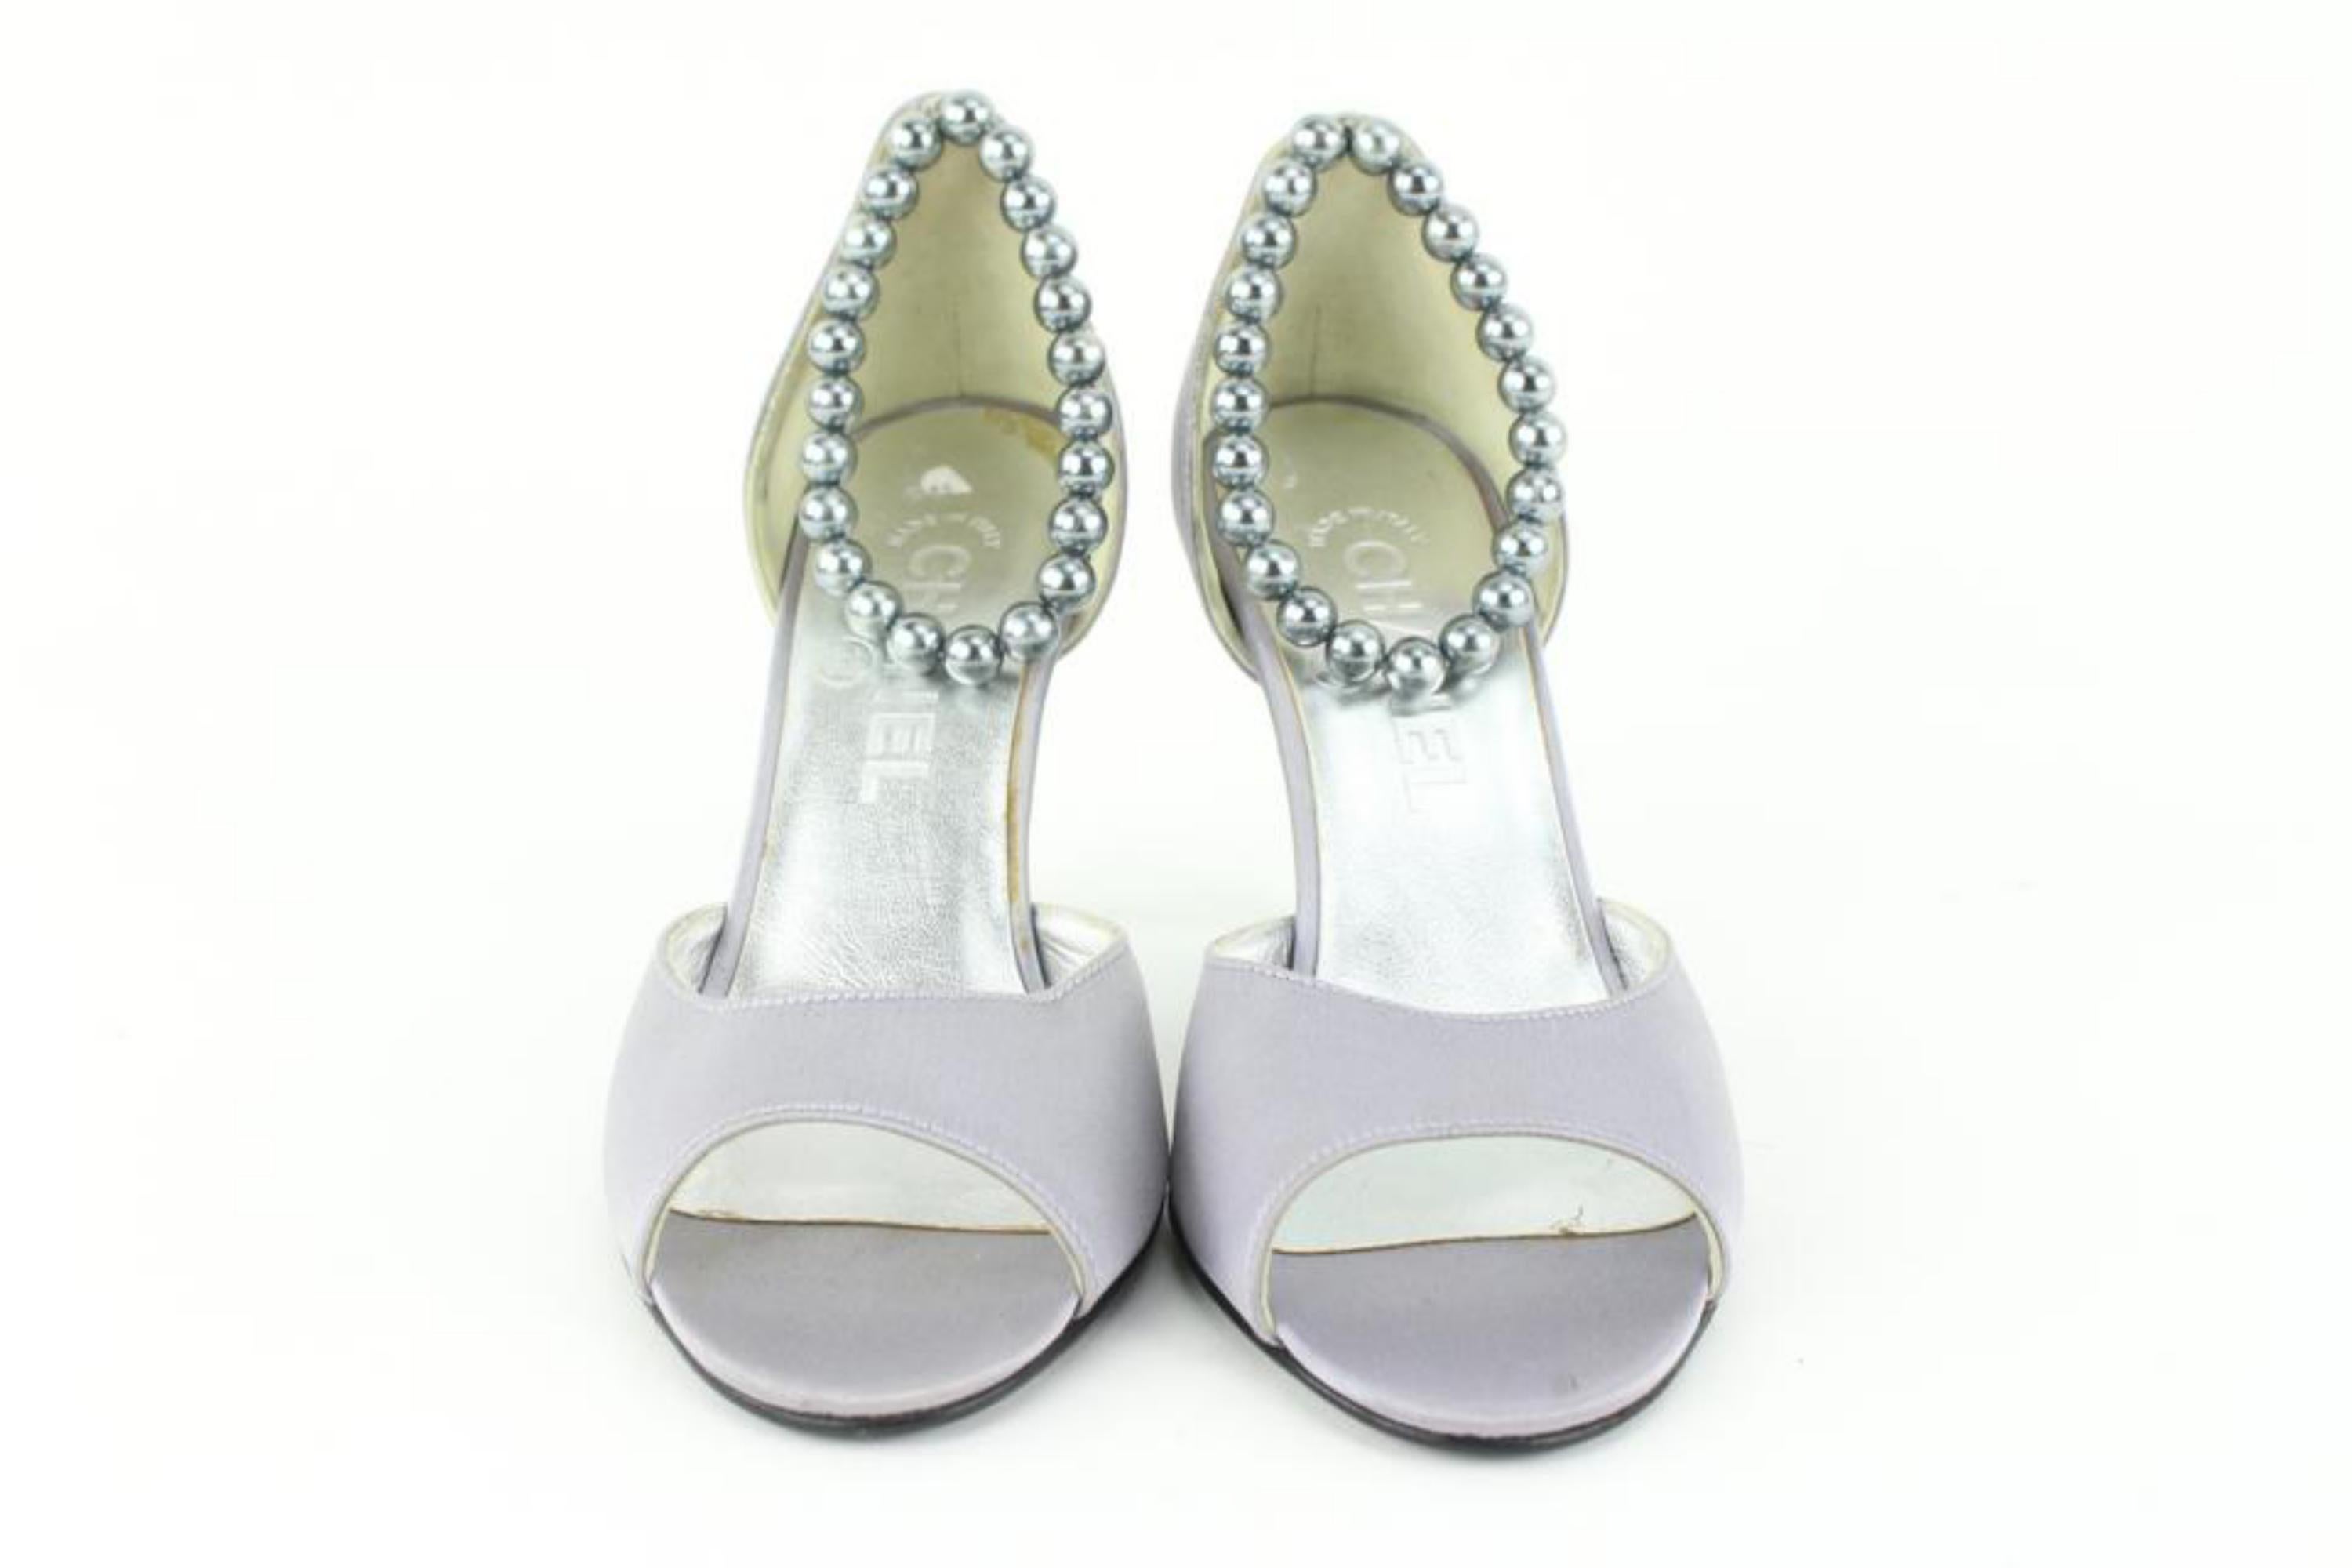 Gray Chanel Size 36.5 Grey Satin Peep Toe Pearl Ankle Strap Pumps Size 13c48 For Sale